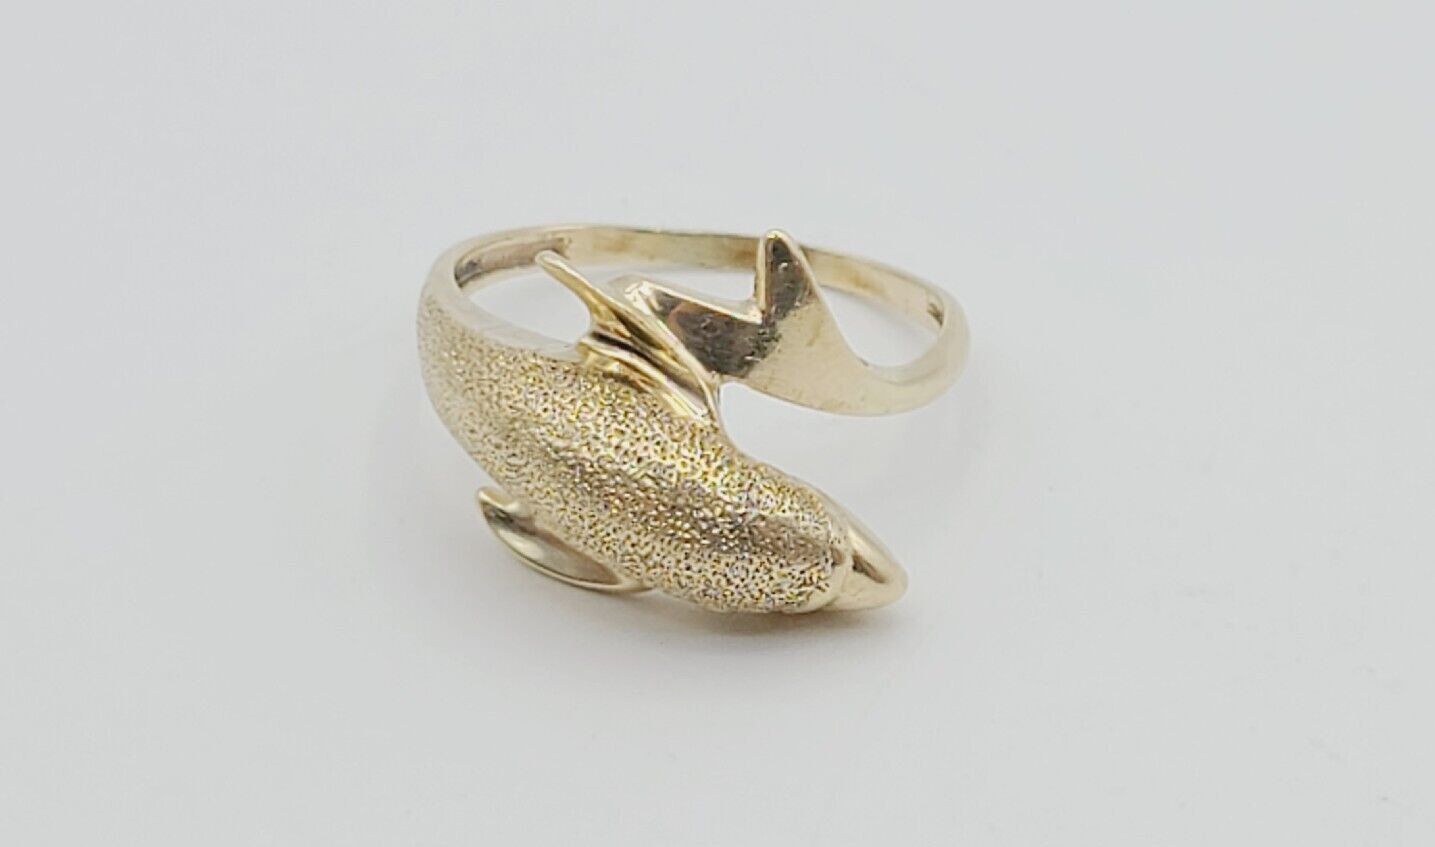 10K Yellow Gold Dolphin Bypass Ring Size 4.5 - image 1